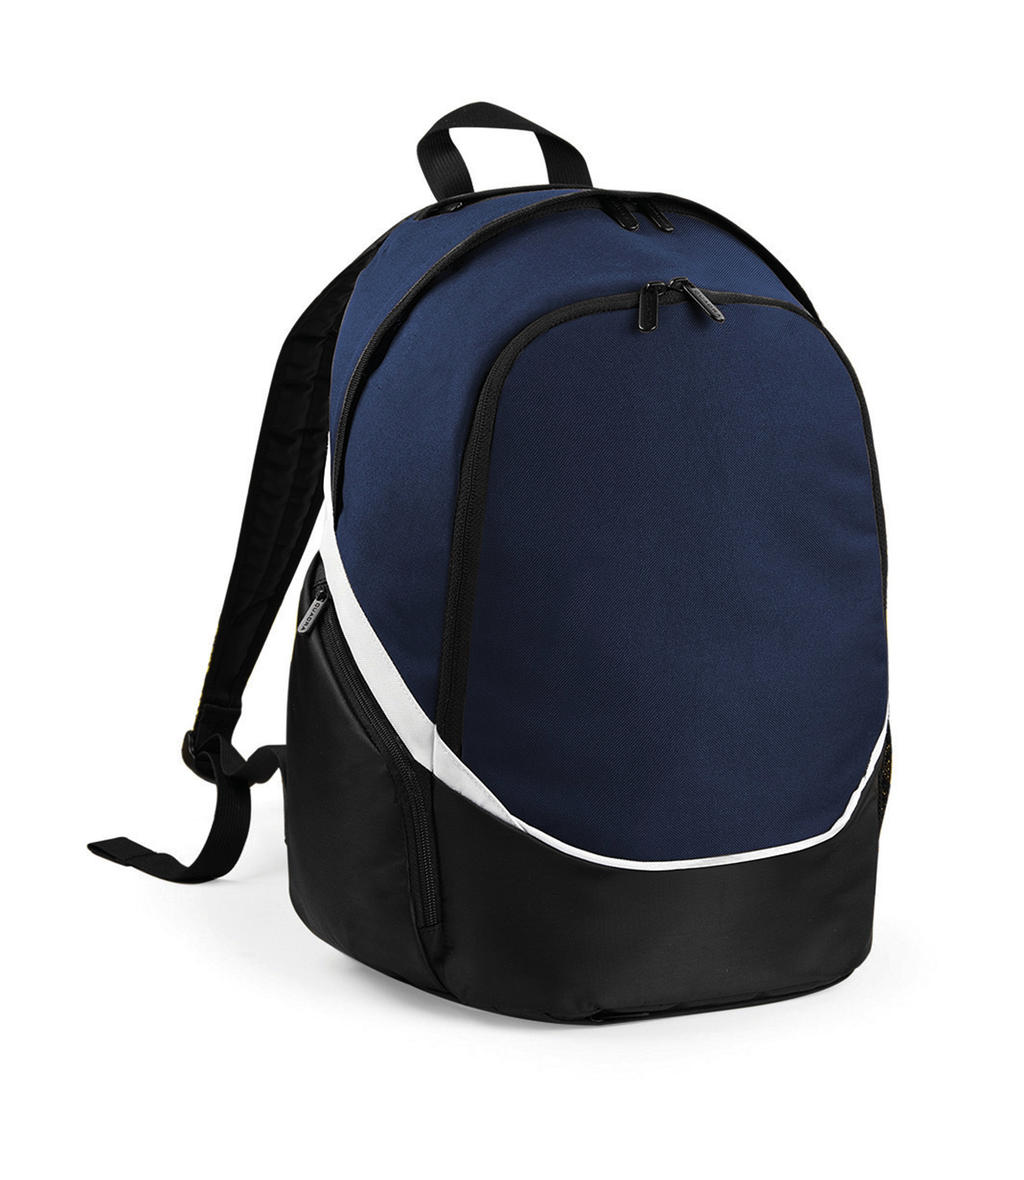  Pro Team Backpack in Farbe French Navy/Black/White